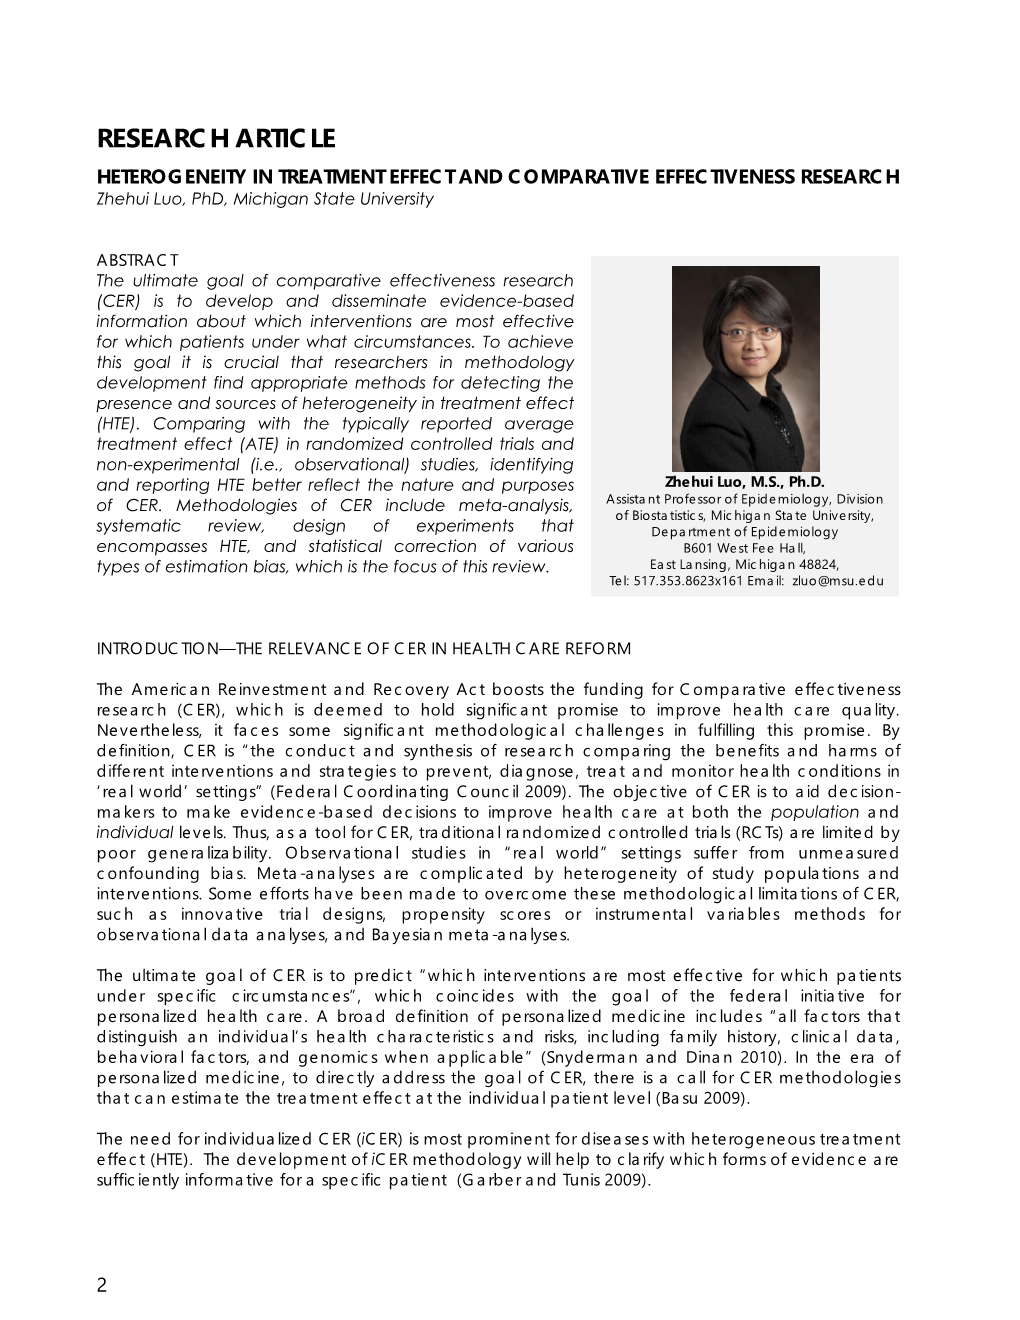 RESEARCH ARTICLE HETEROGENEITY in TREATMENT EFFECT and COMPARATIVE EFFECTIVENESS RESEARCH Zhehui Luo, Phd, Michigan State University